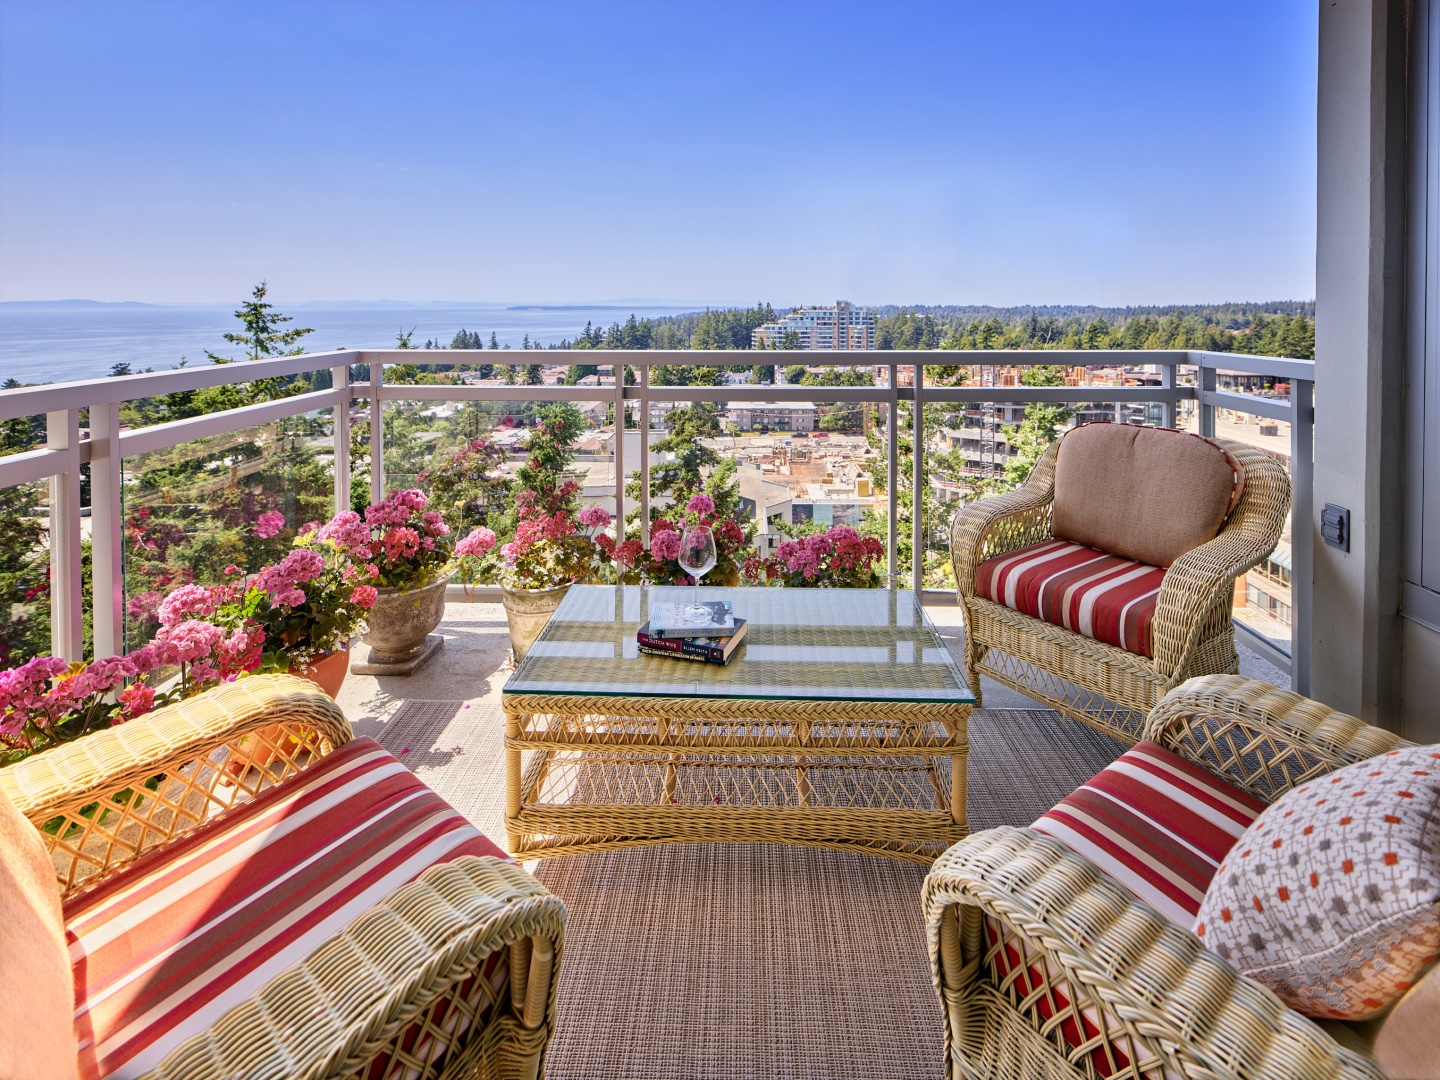 15 Gorgeous Transitional Balcony Designs to Enjoy Your View in Style